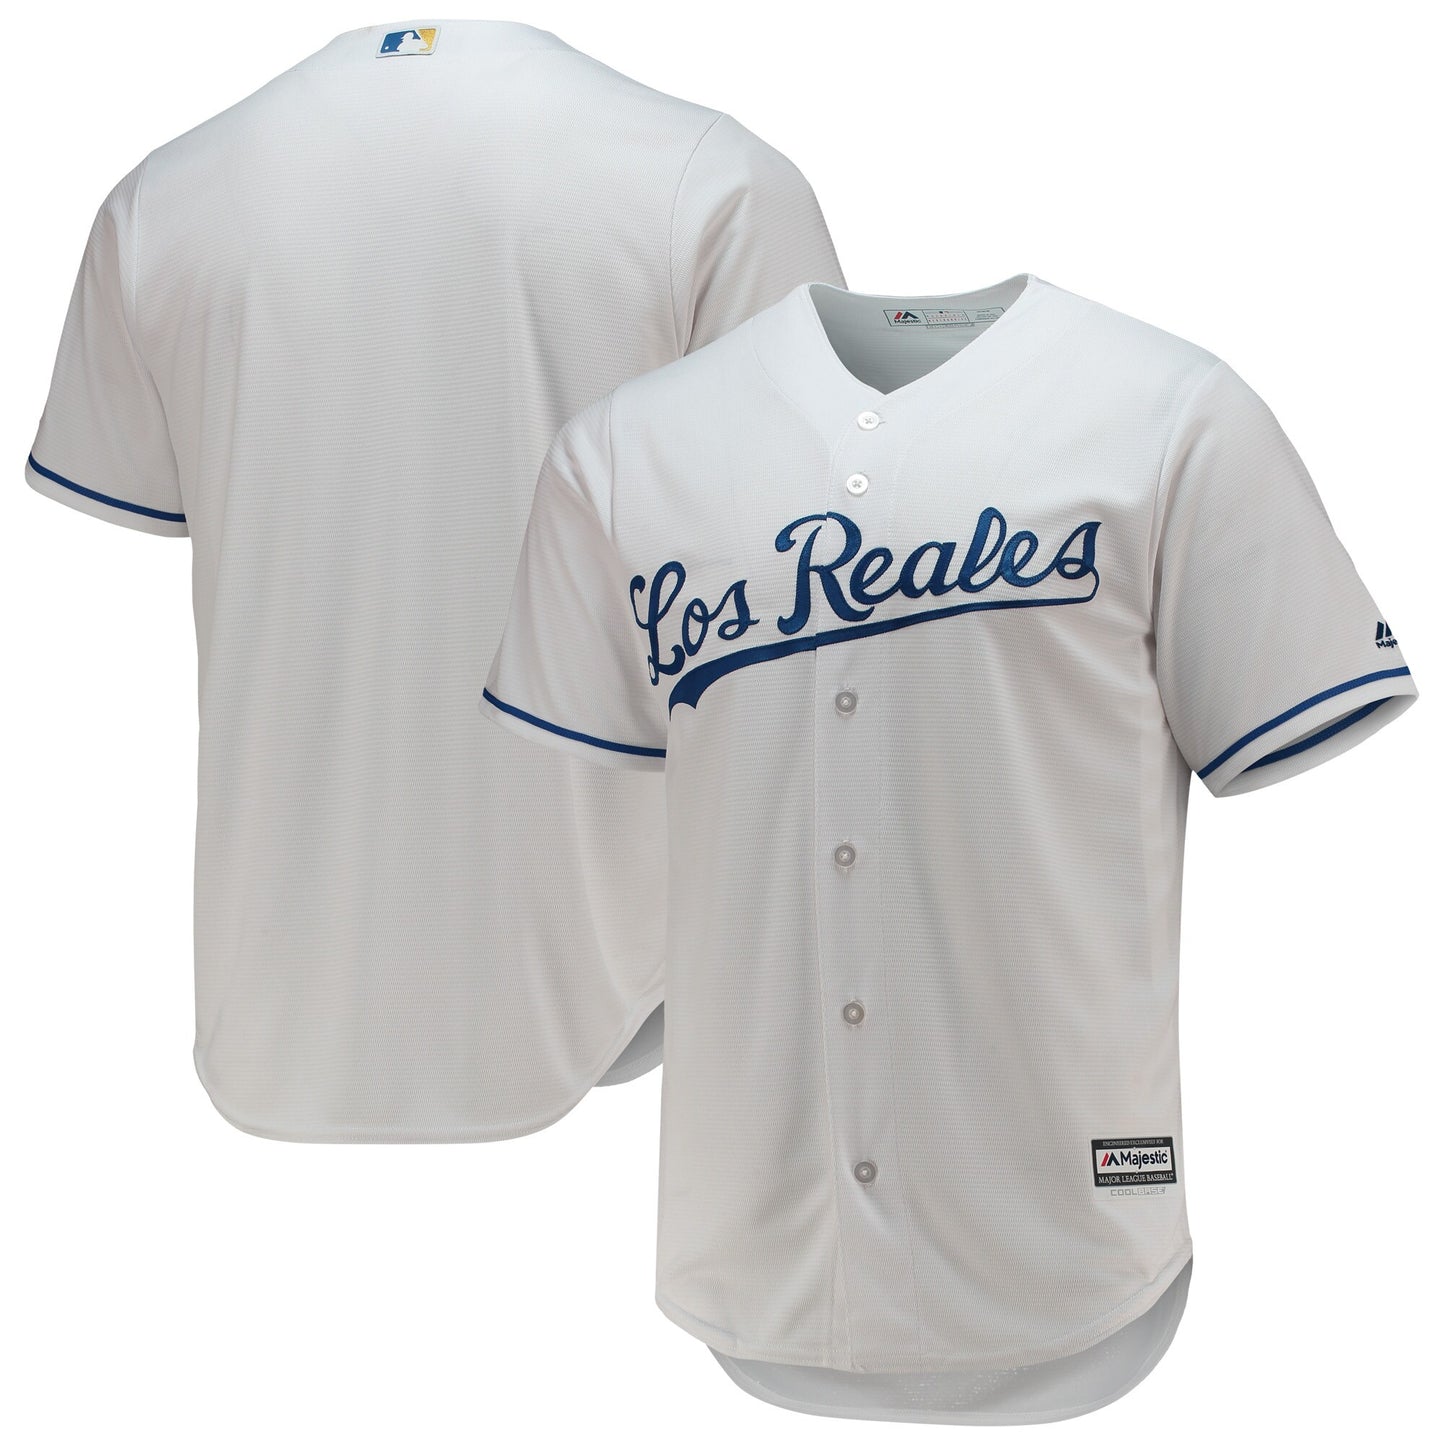 Kansas City Royals Majestic Team Official Jersey - White